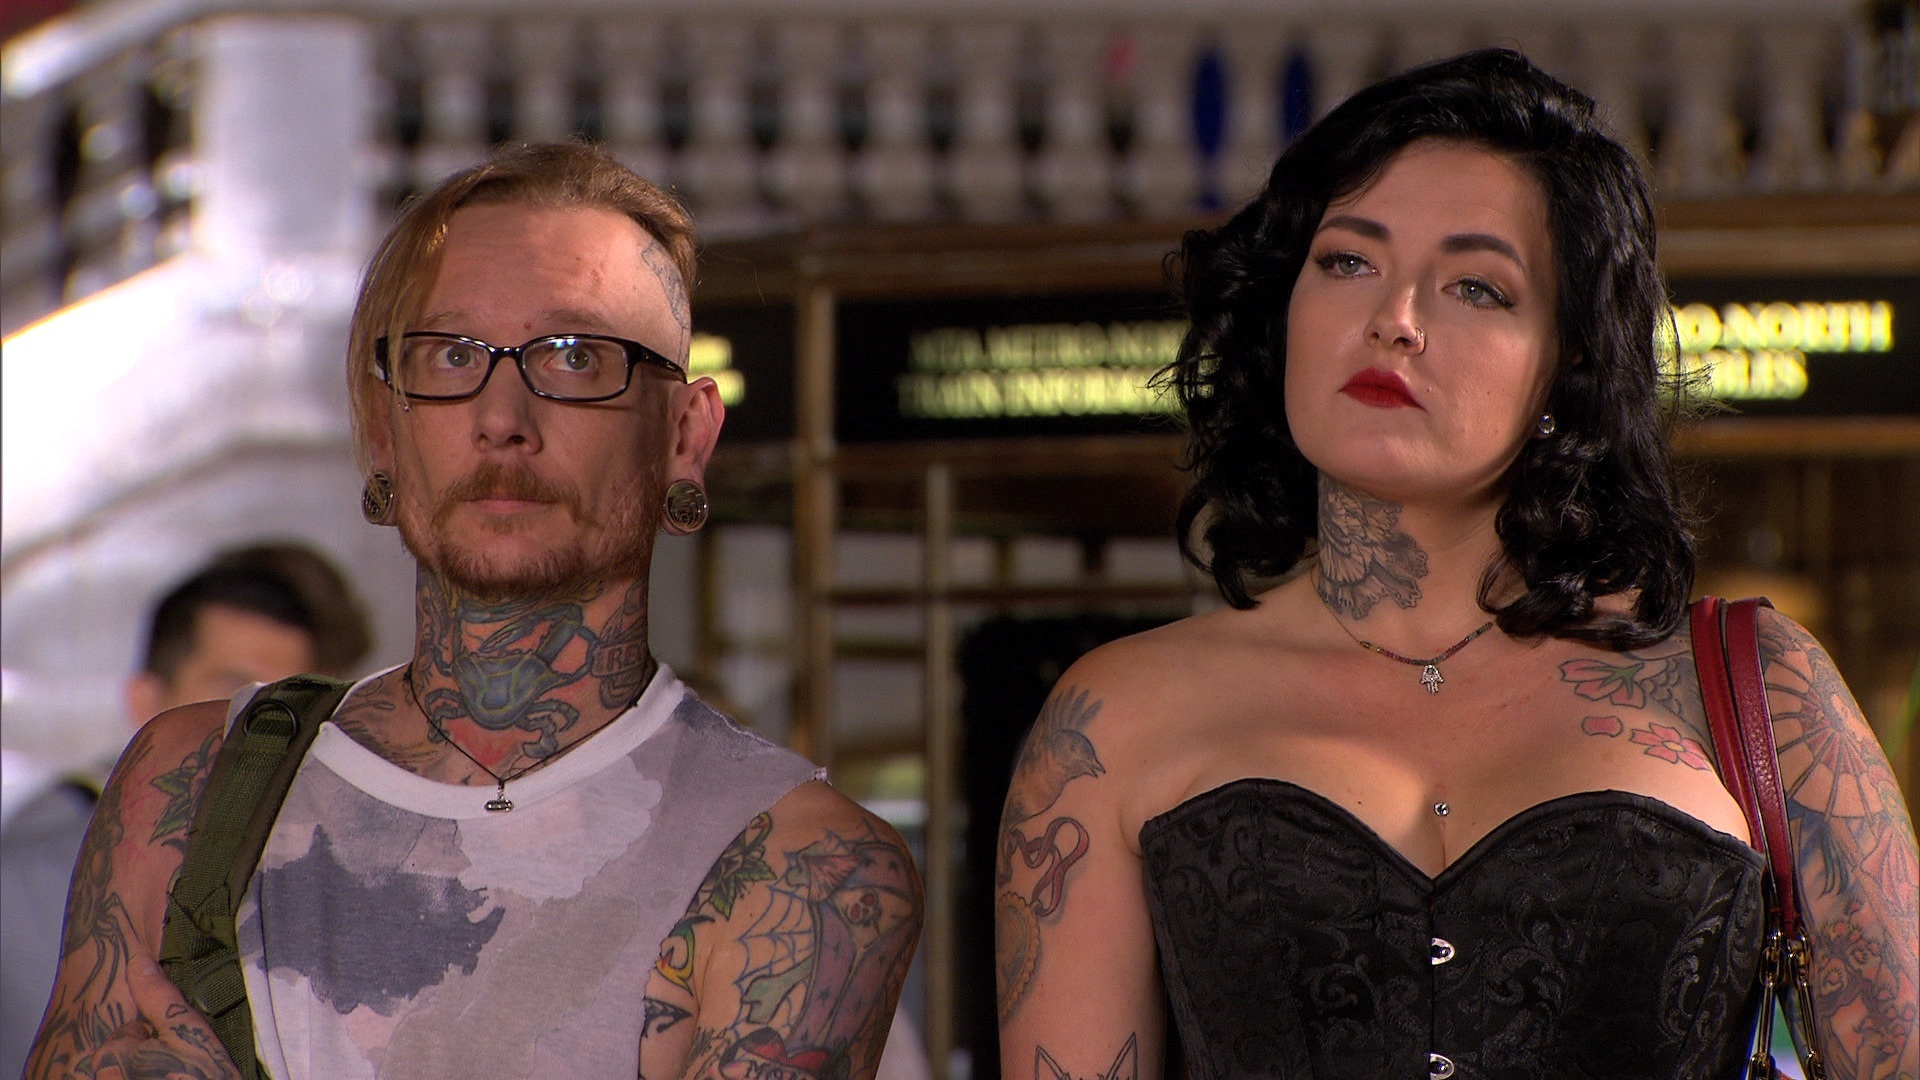 Watch Ink Master Season 5 Episode 1 Ink Master Inking With The Enemy Full Show On Paramount 0651